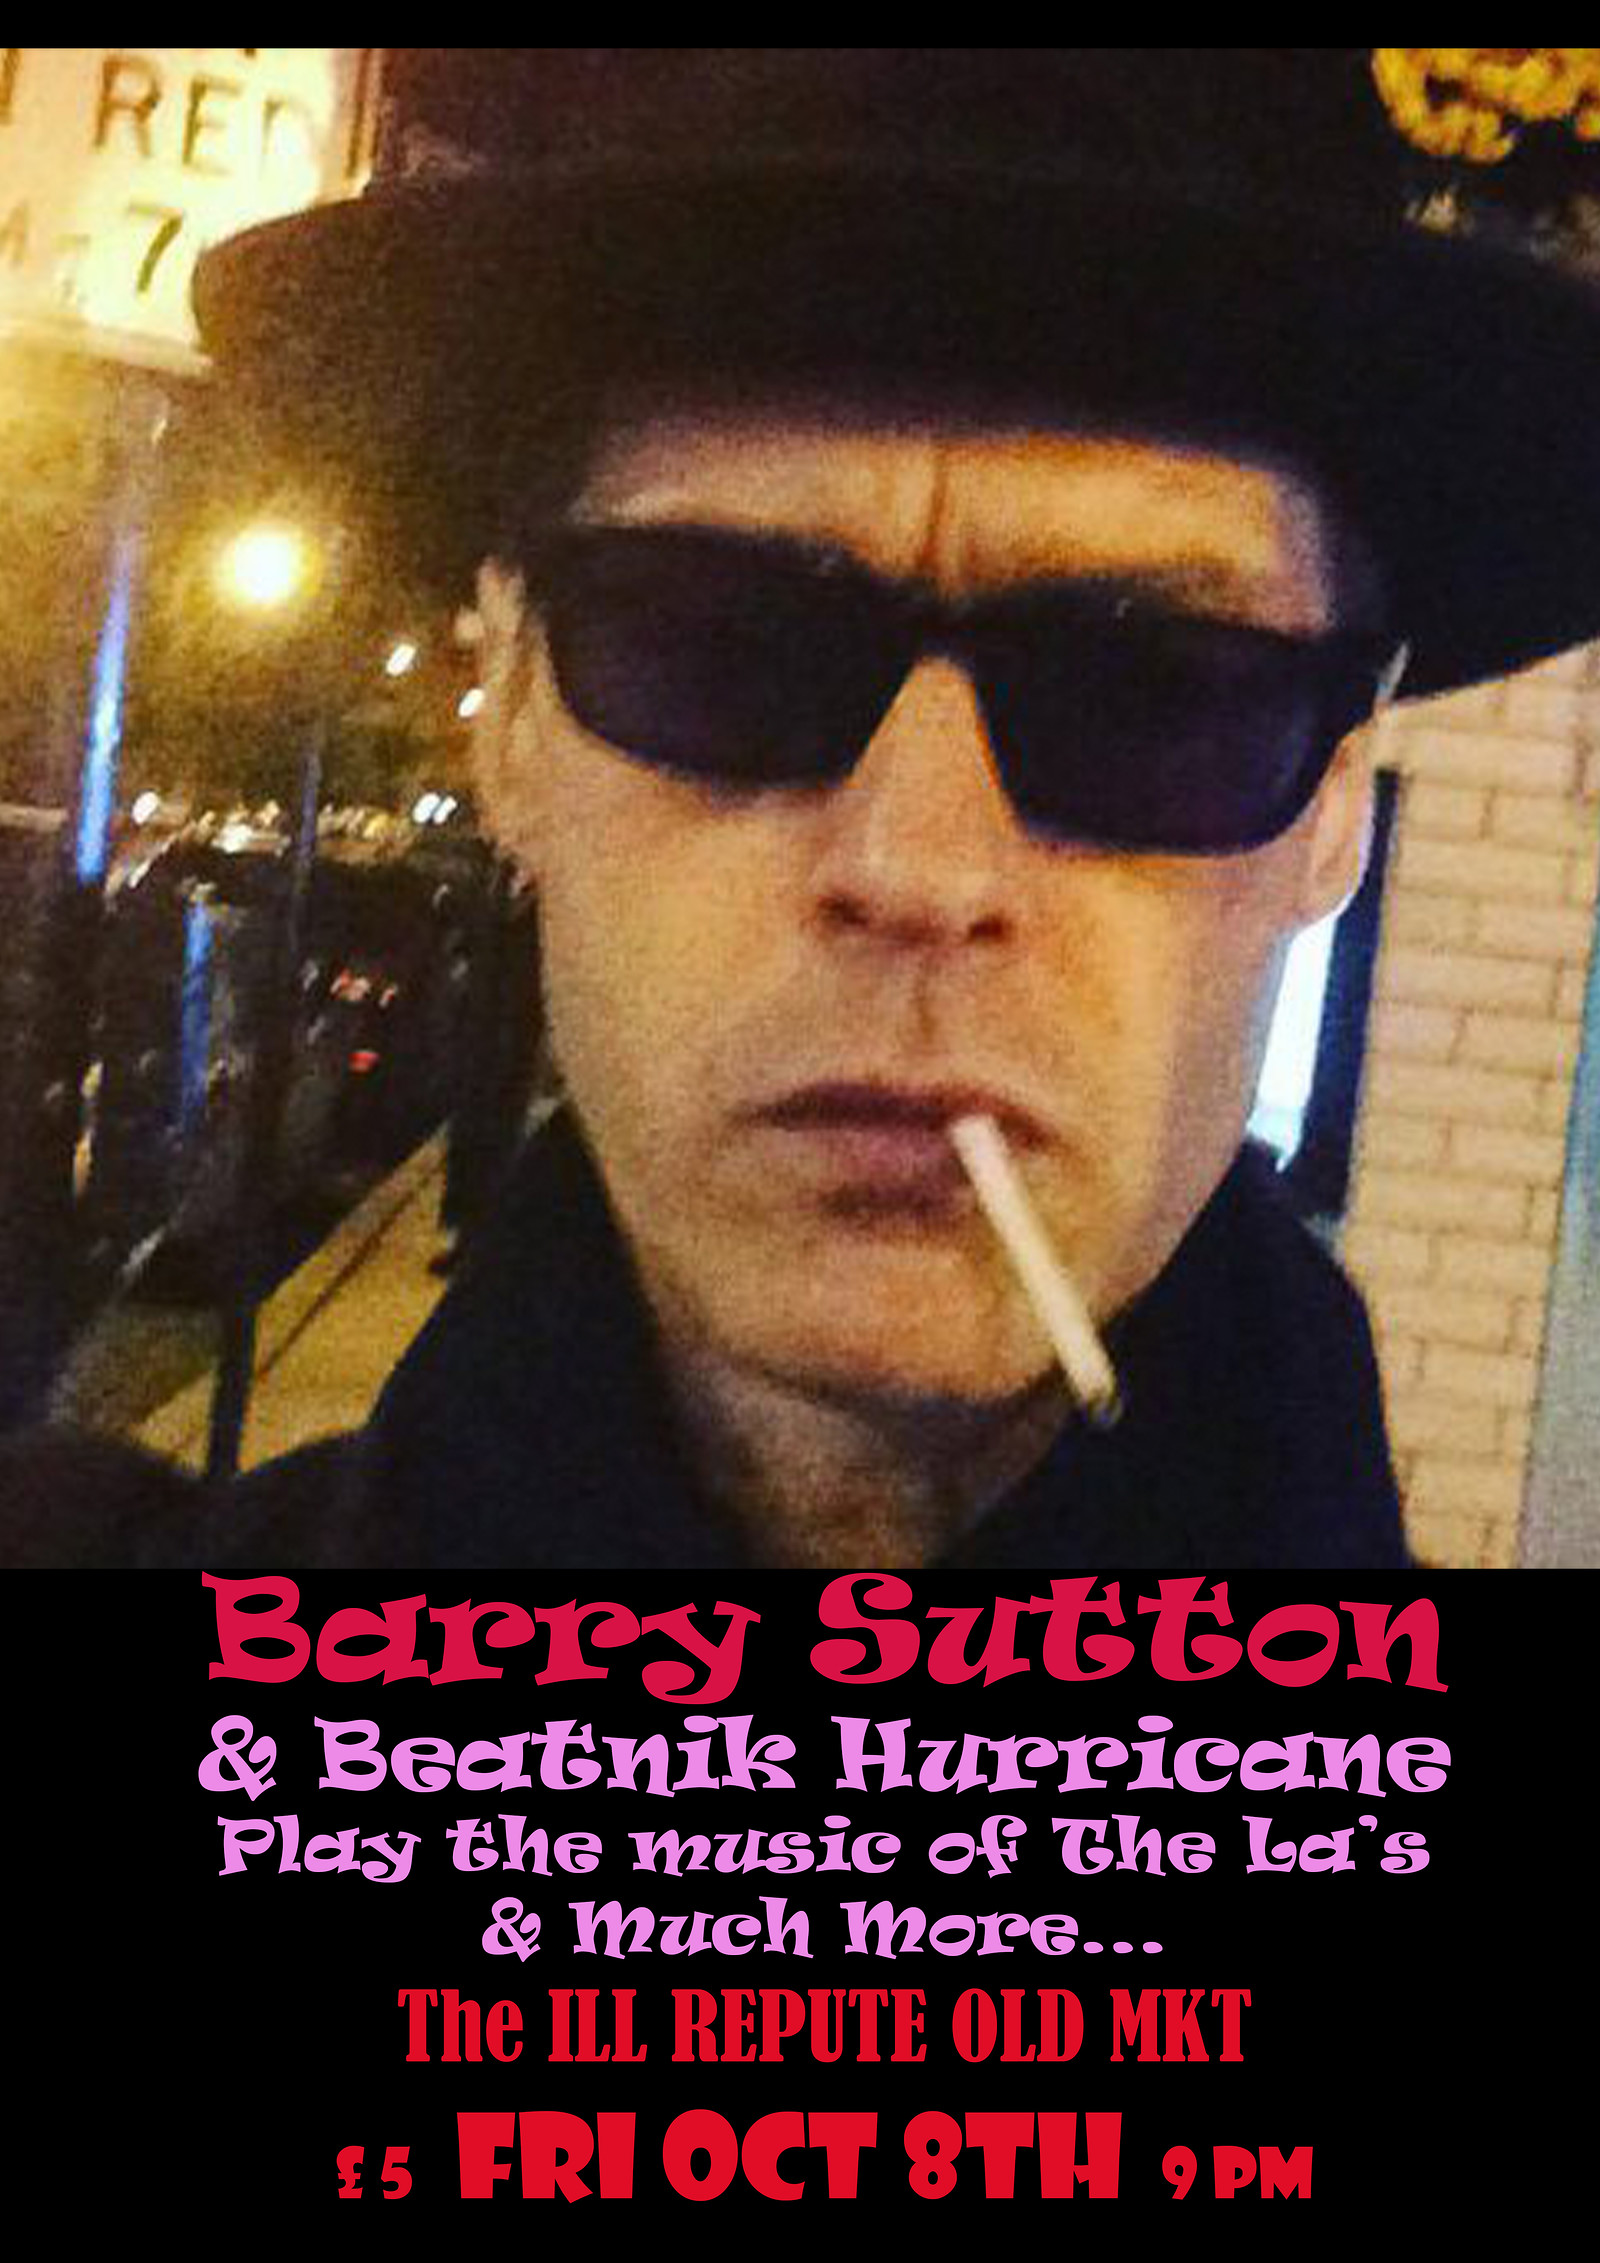 Barry Sutton play The La's and other stuff at The ILL REPUTE